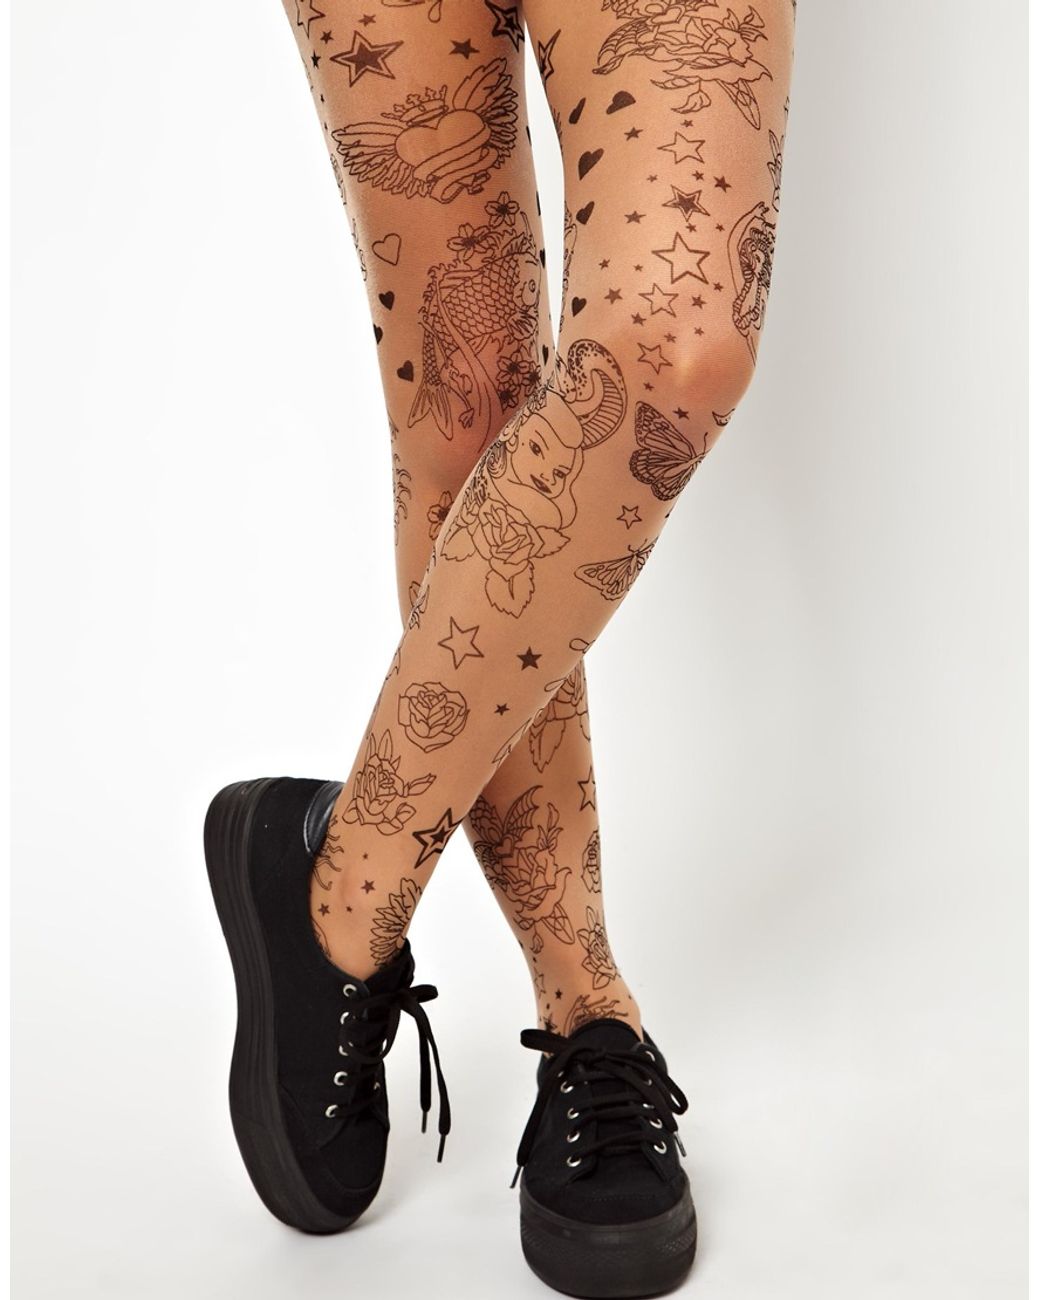 Tattoo Tights With Flowers Print , Handprinted Womens Pantyhose , Trendy Tattoo  Tights - Etsy | Tattoo tights, Tattoos to cover scars, Trendy tattoos